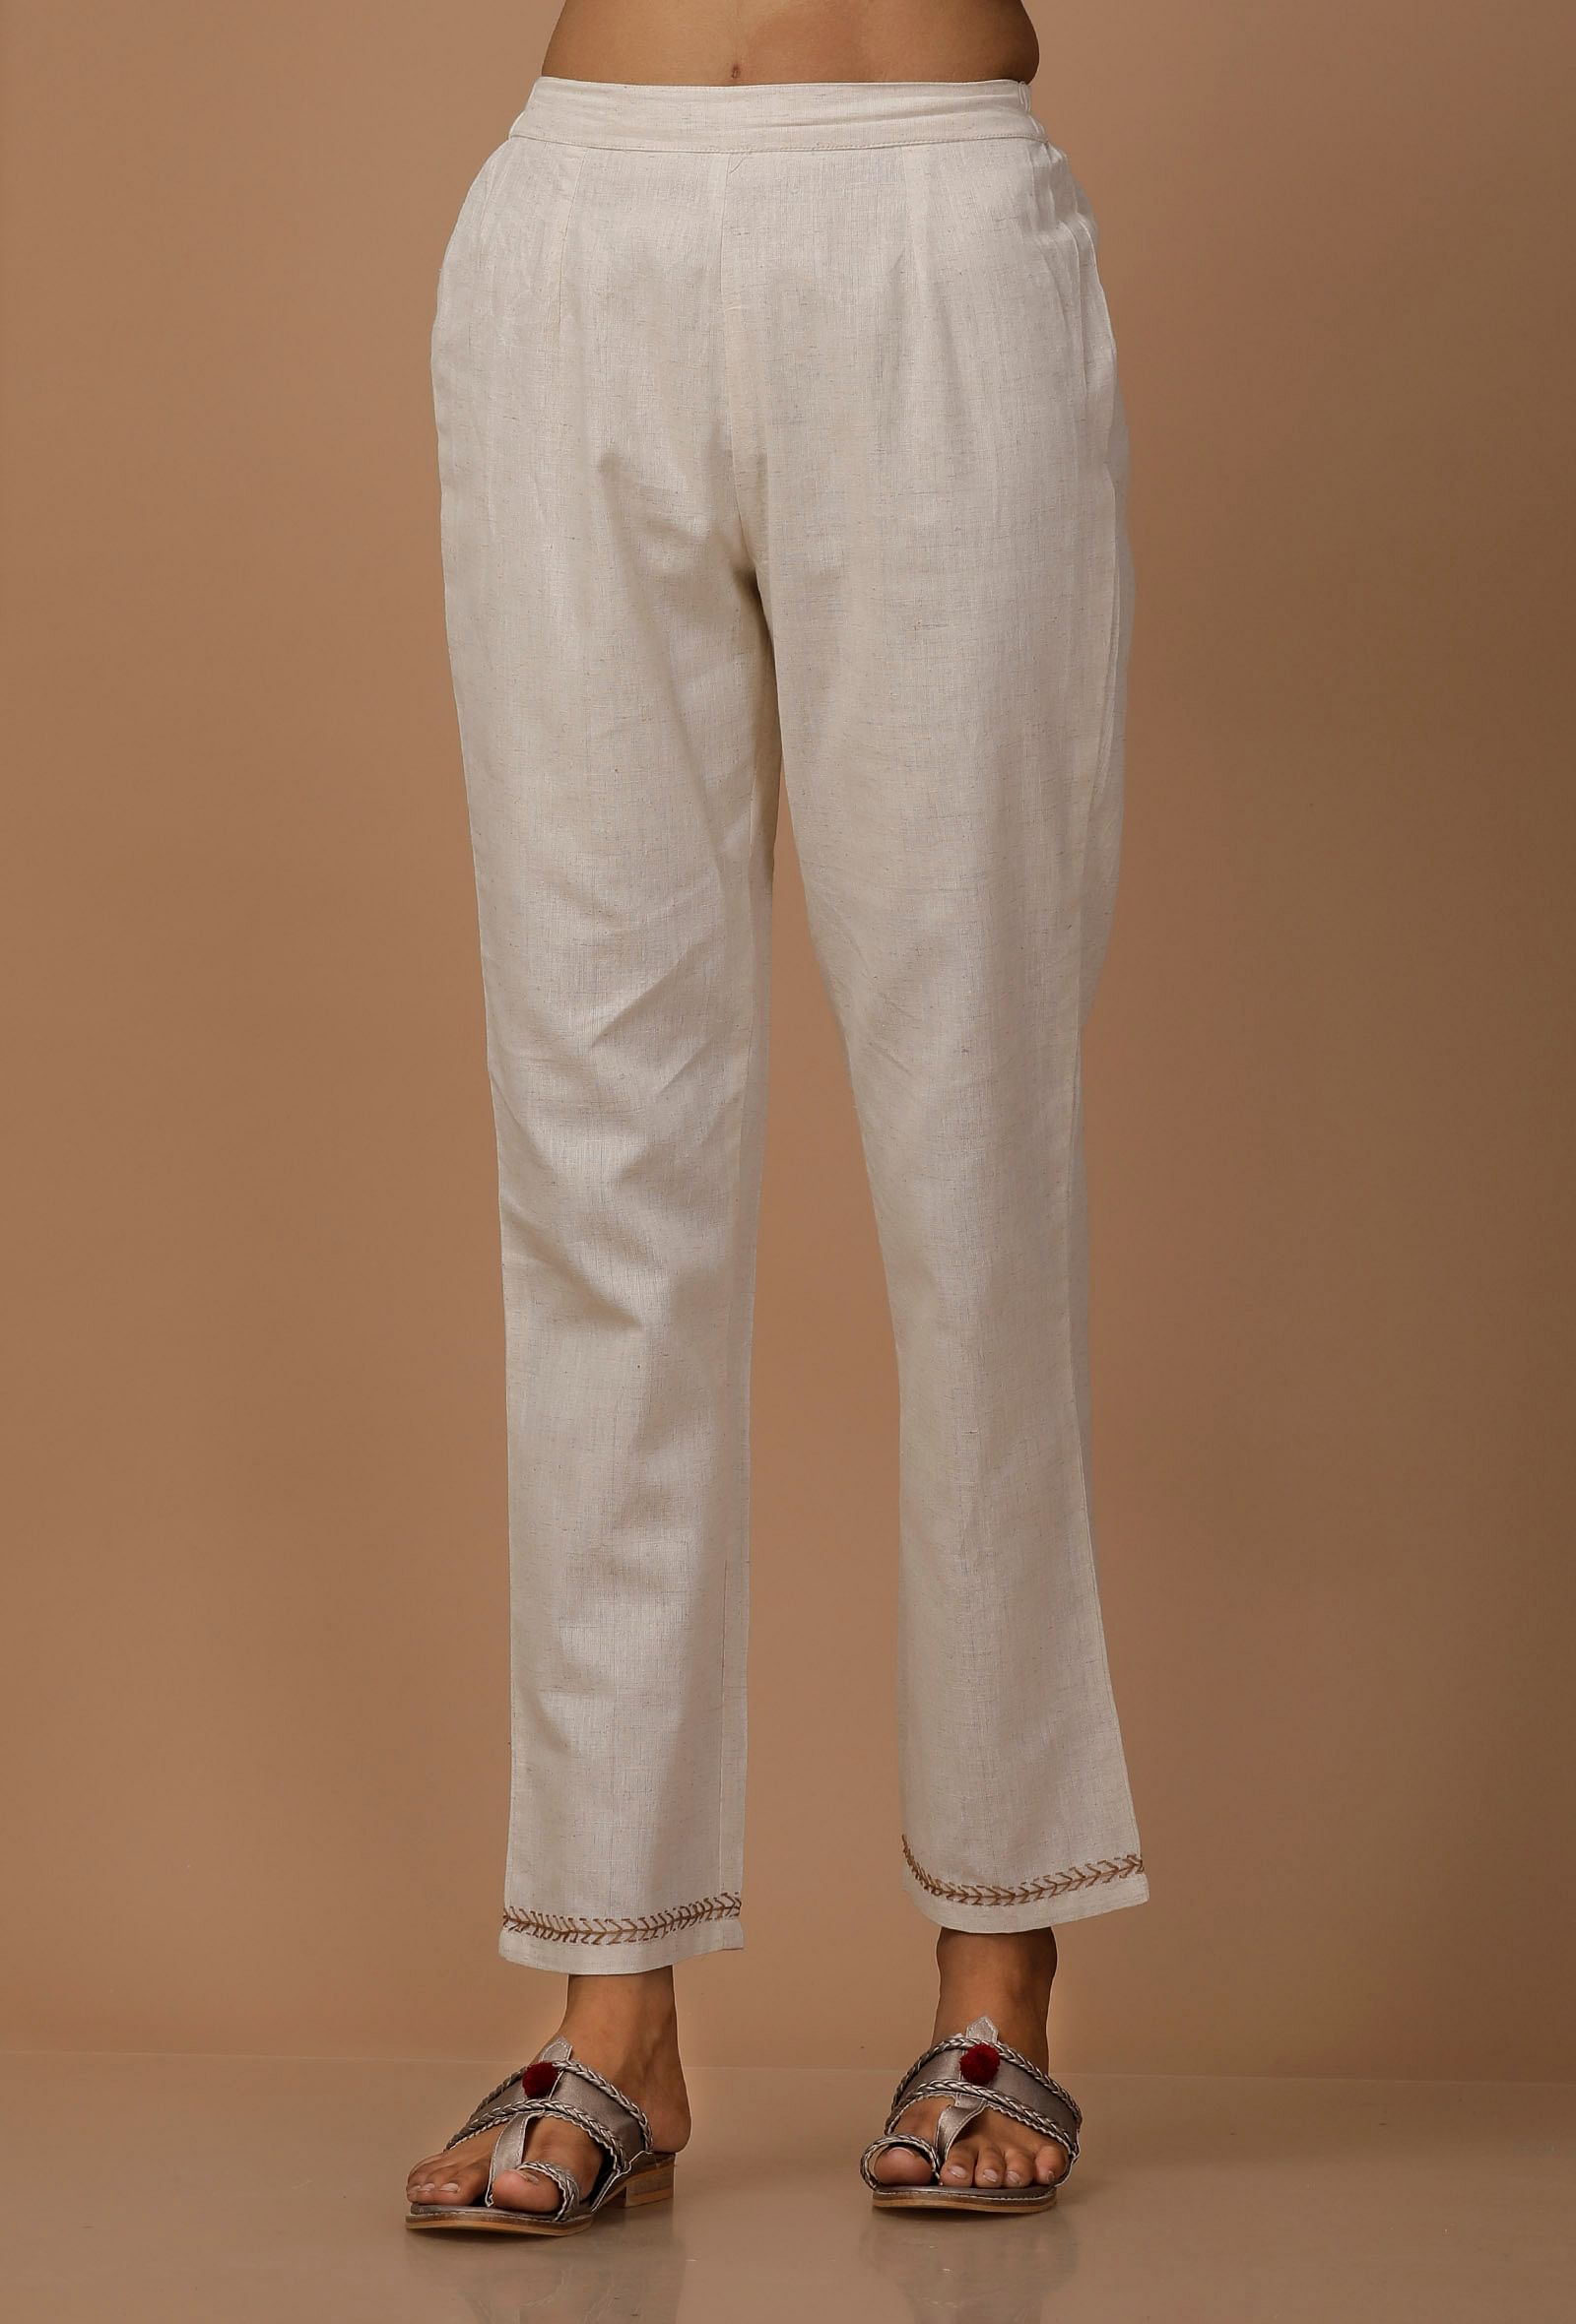 Buy White Trousers & Pants for Women by Outryt Online | Ajio.com